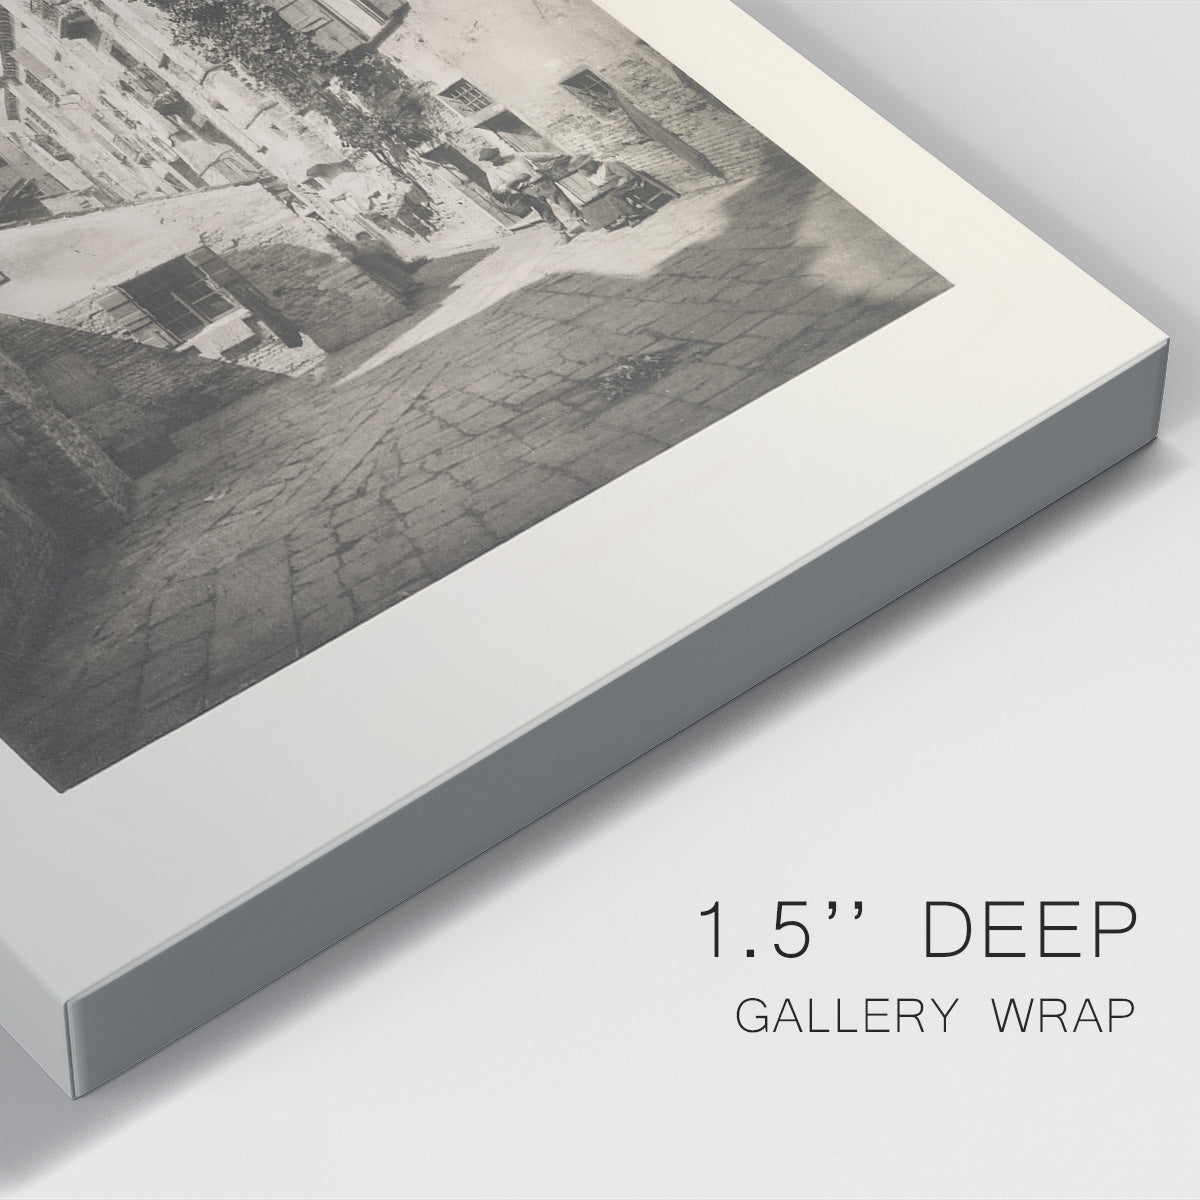 Vintage Views of Venice VIII Premium Gallery Wrapped Canvas - Ready to Hang